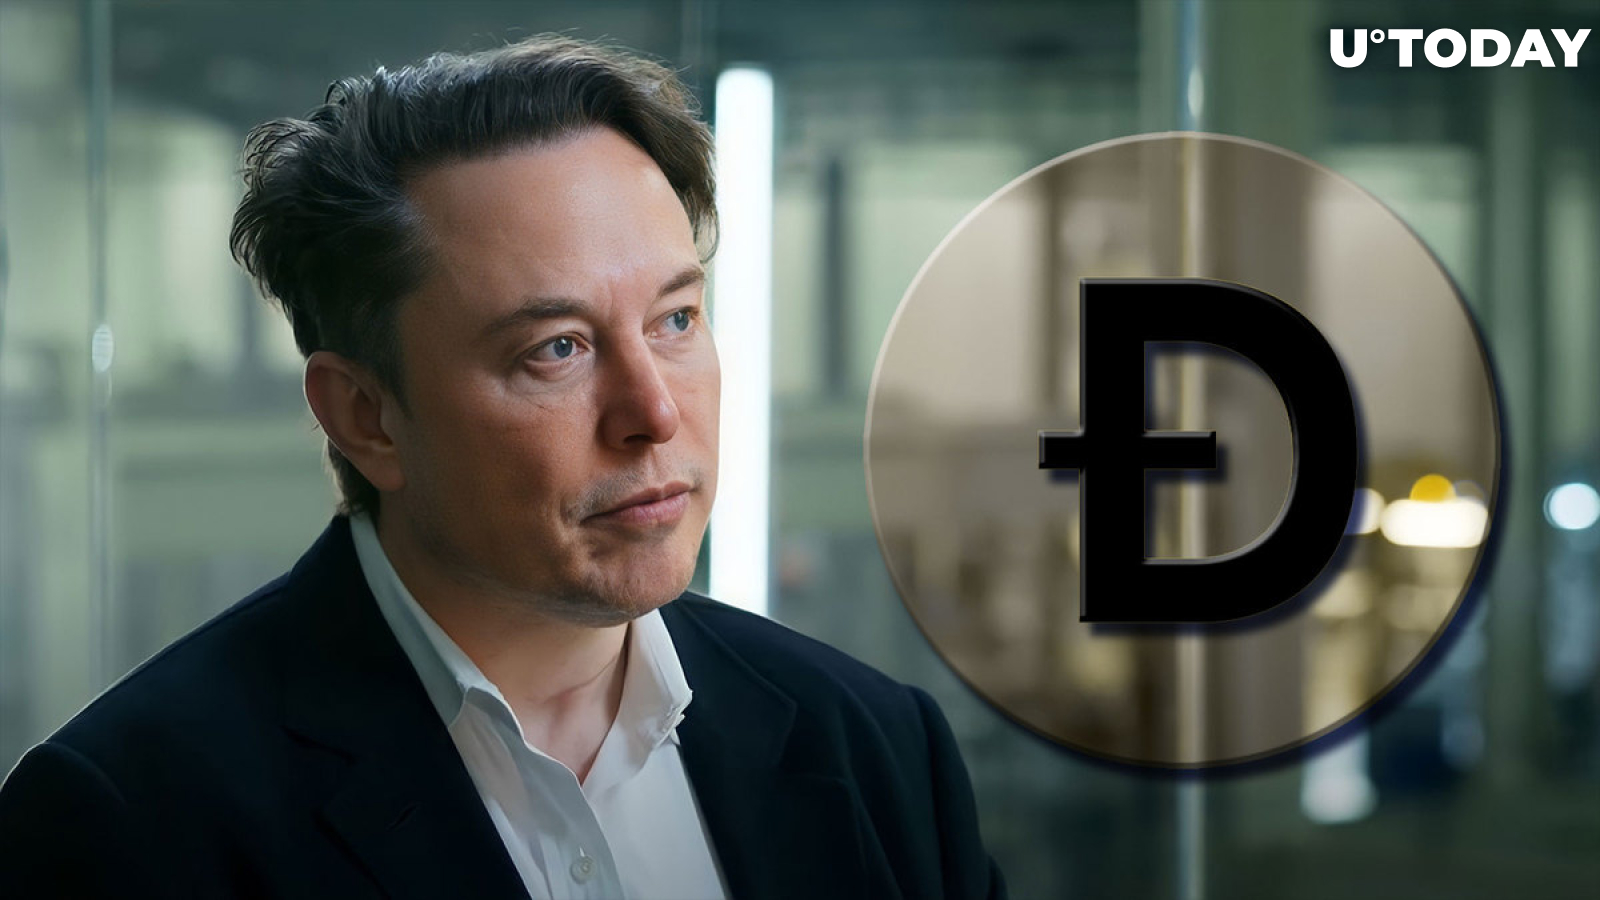 Elon Musk Joins Dogecoin Designer in Addressing Twitter CEO About Crypto Bots